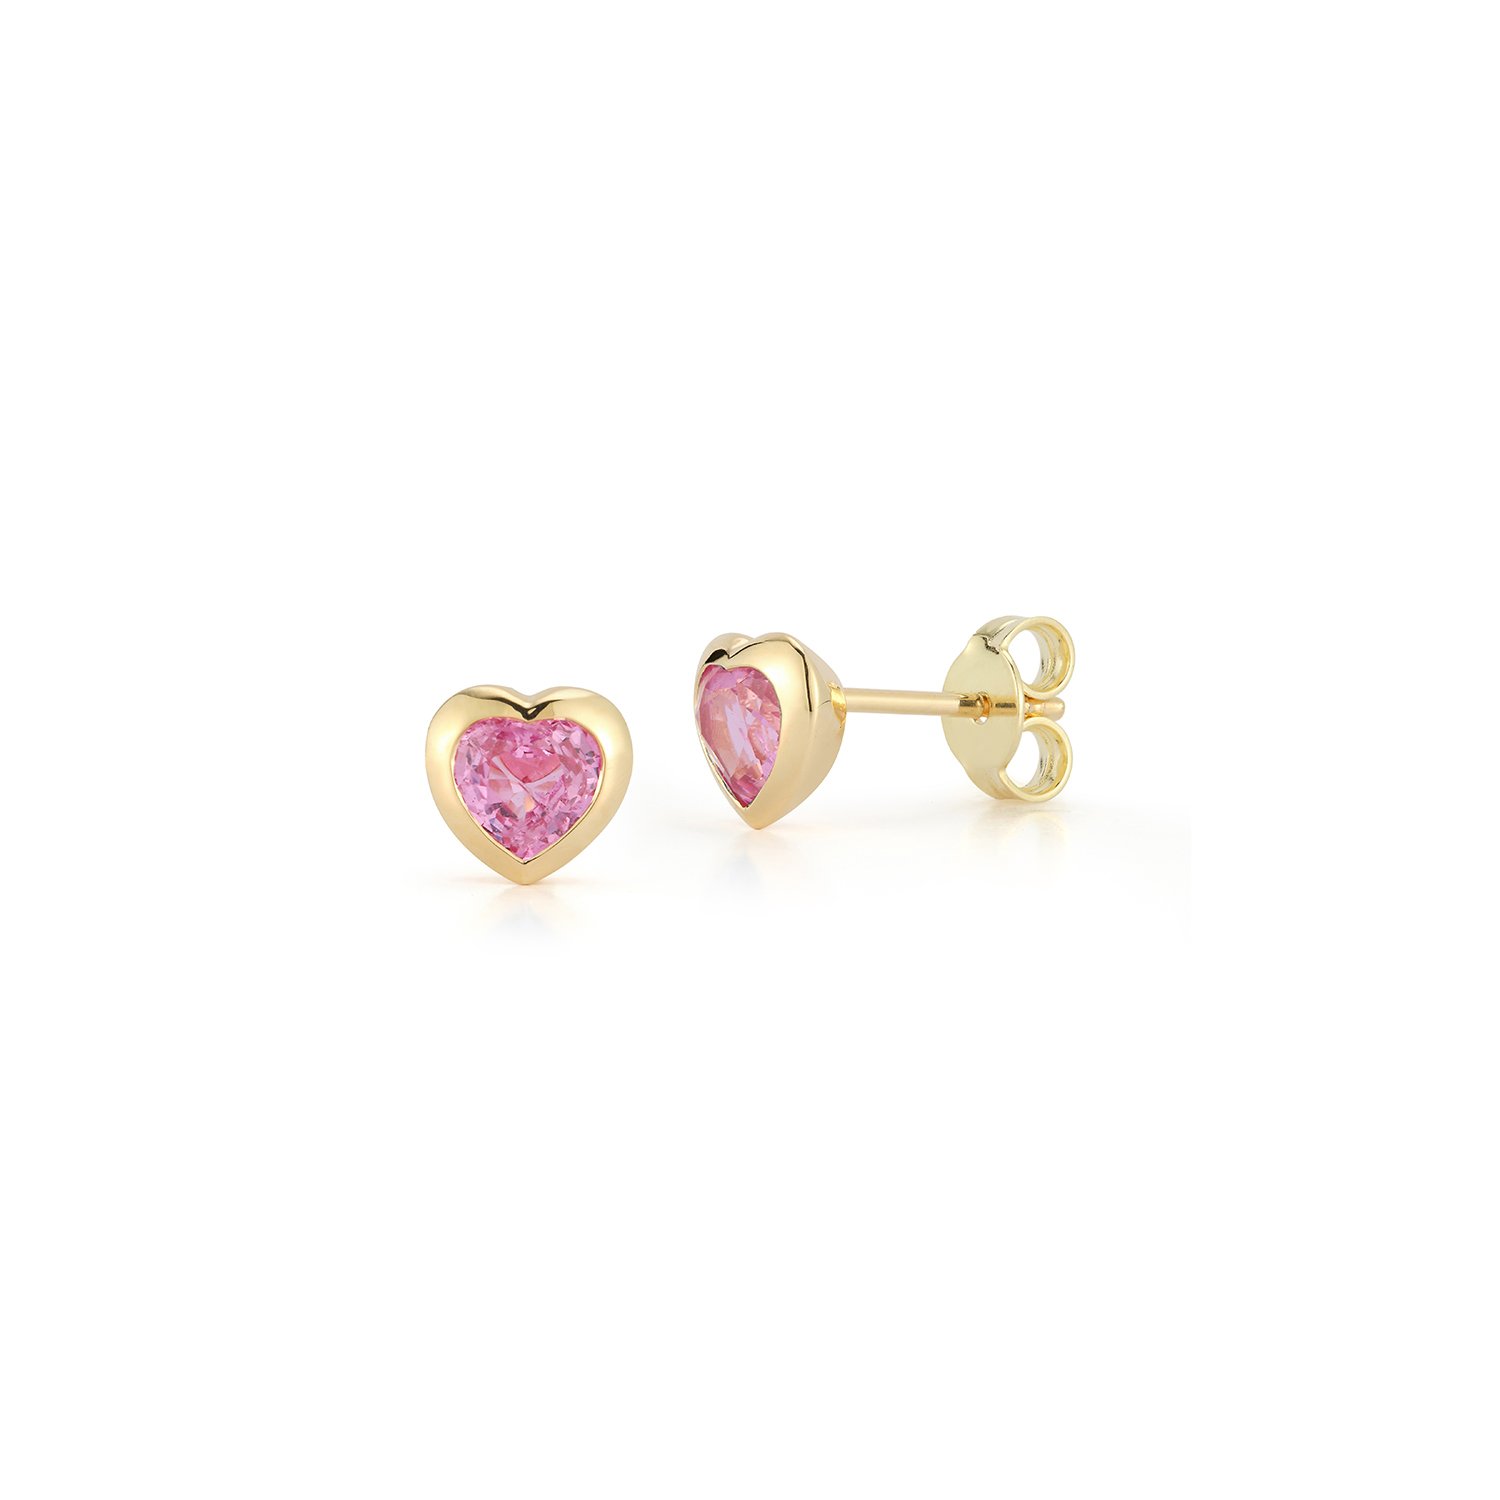 The Hearts Club Small Stud Earrings with Pink Sapphires in 18kt Yellow Gold